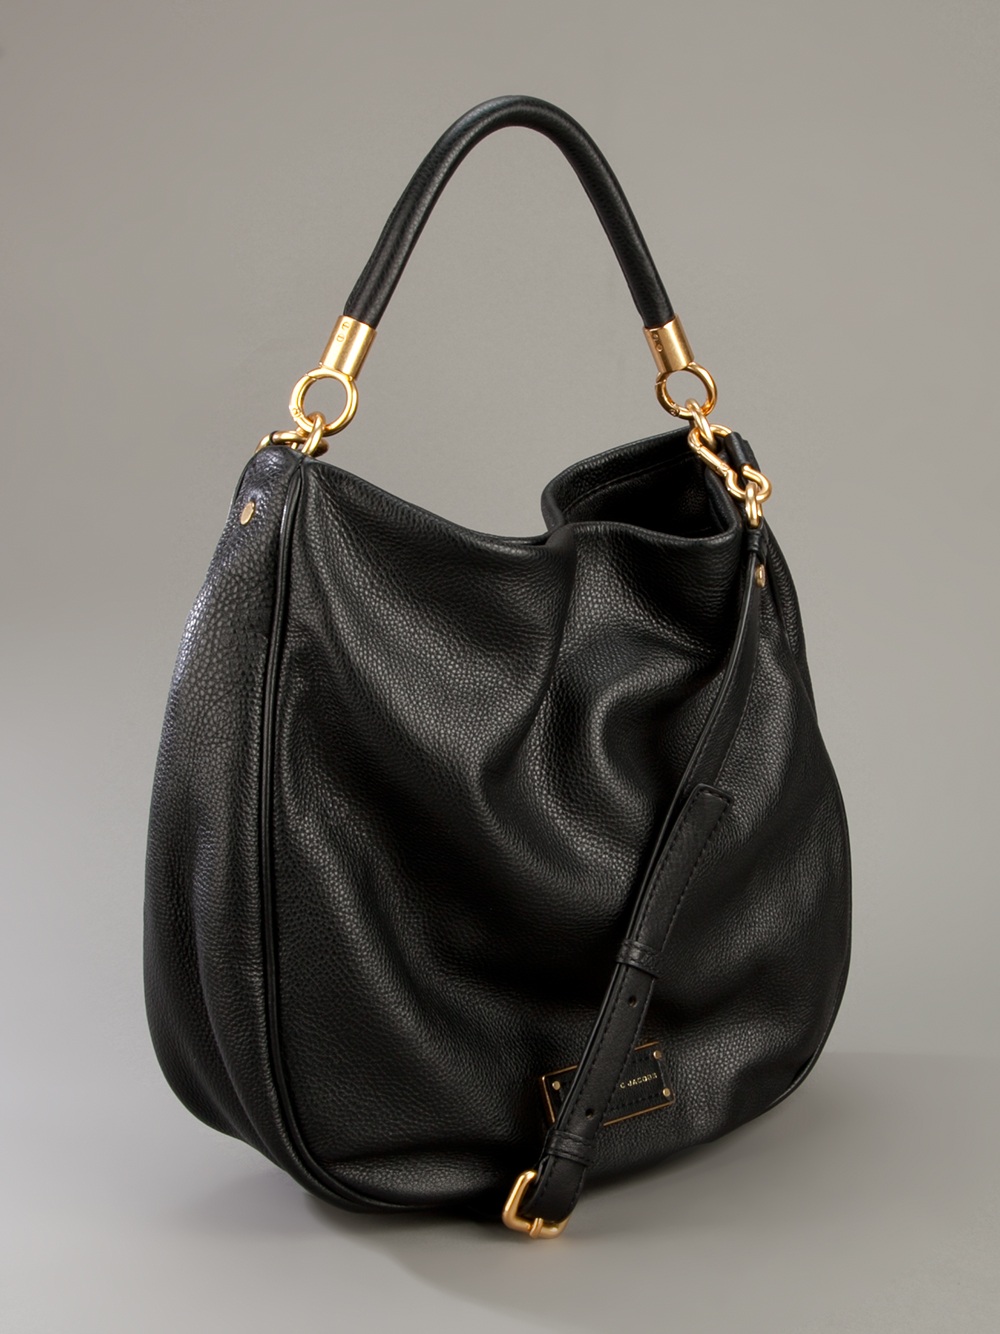 Marc by marc jacobs Too Hot To Handle Hobo Bag in Black | Lyst